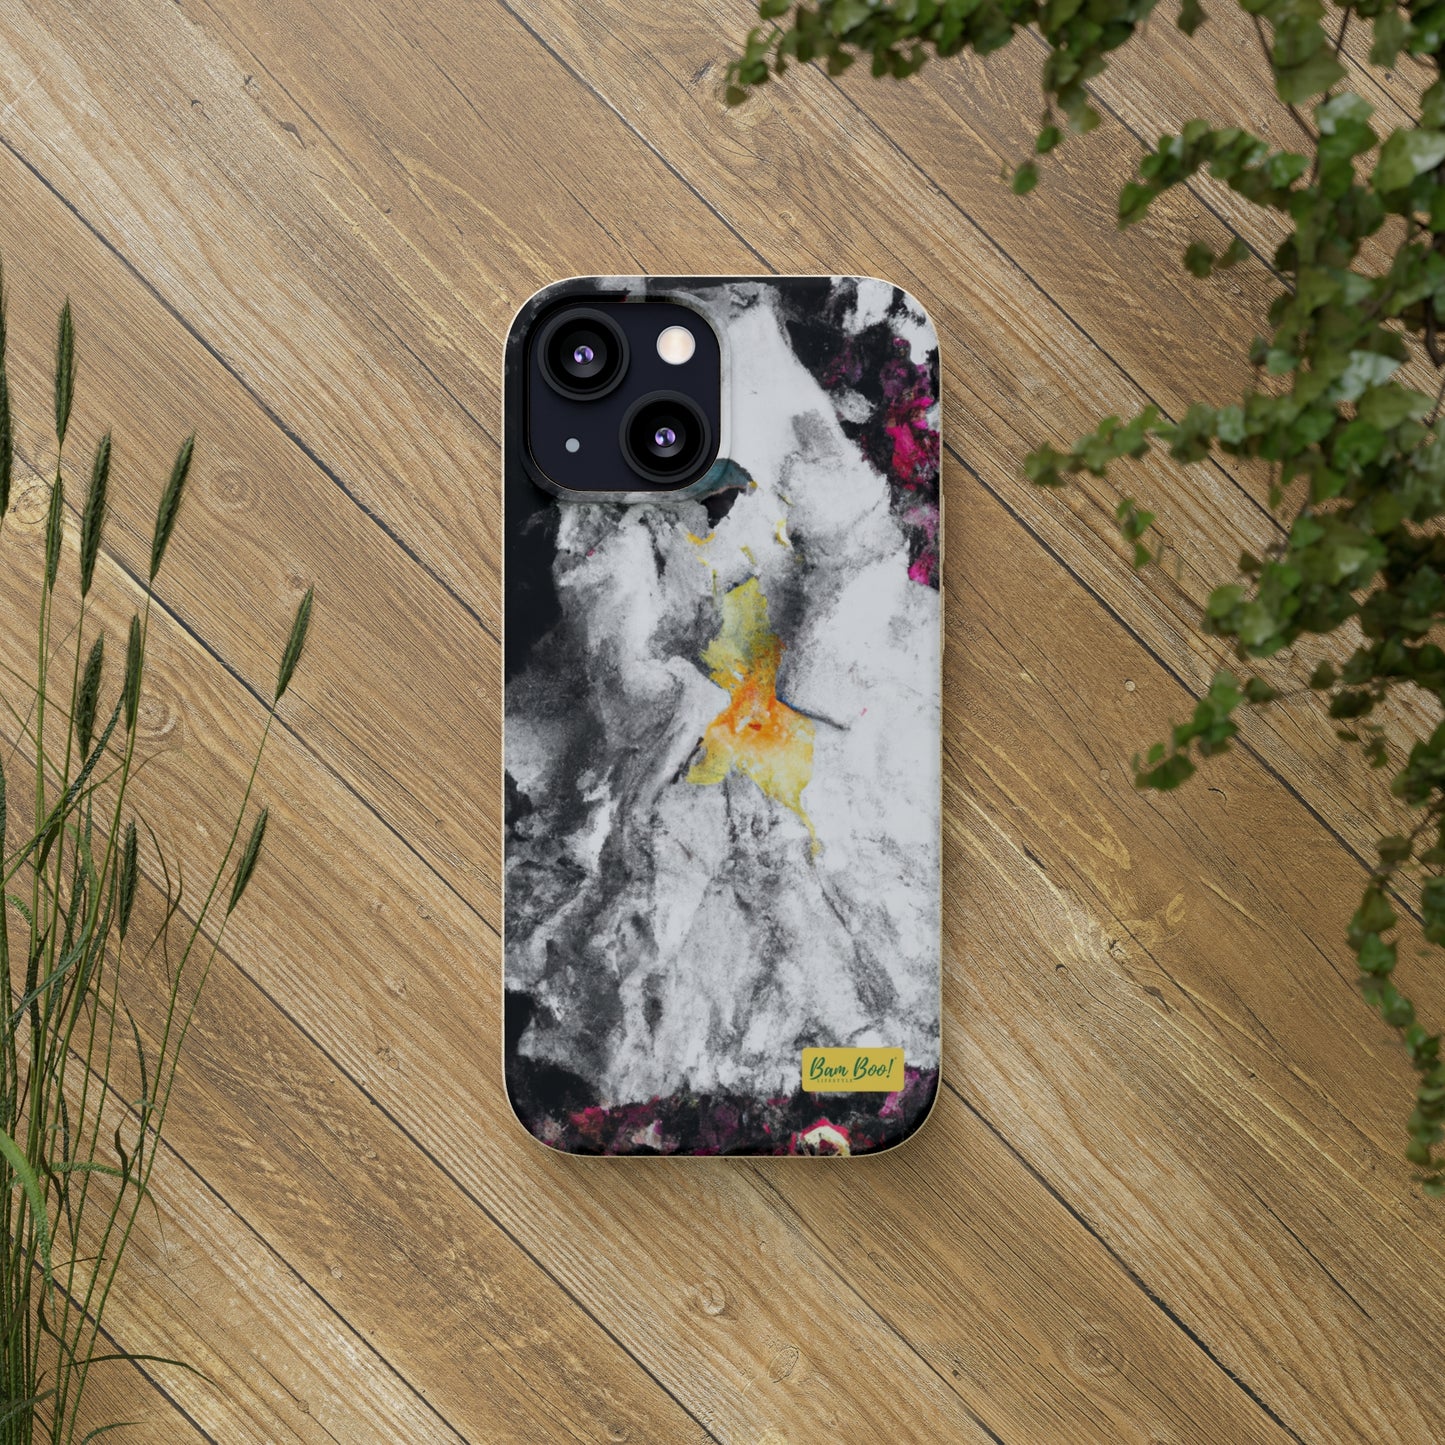 "The Triumphant Power of Love" - Bam Boo! Lifestyle Eco-friendly Cases